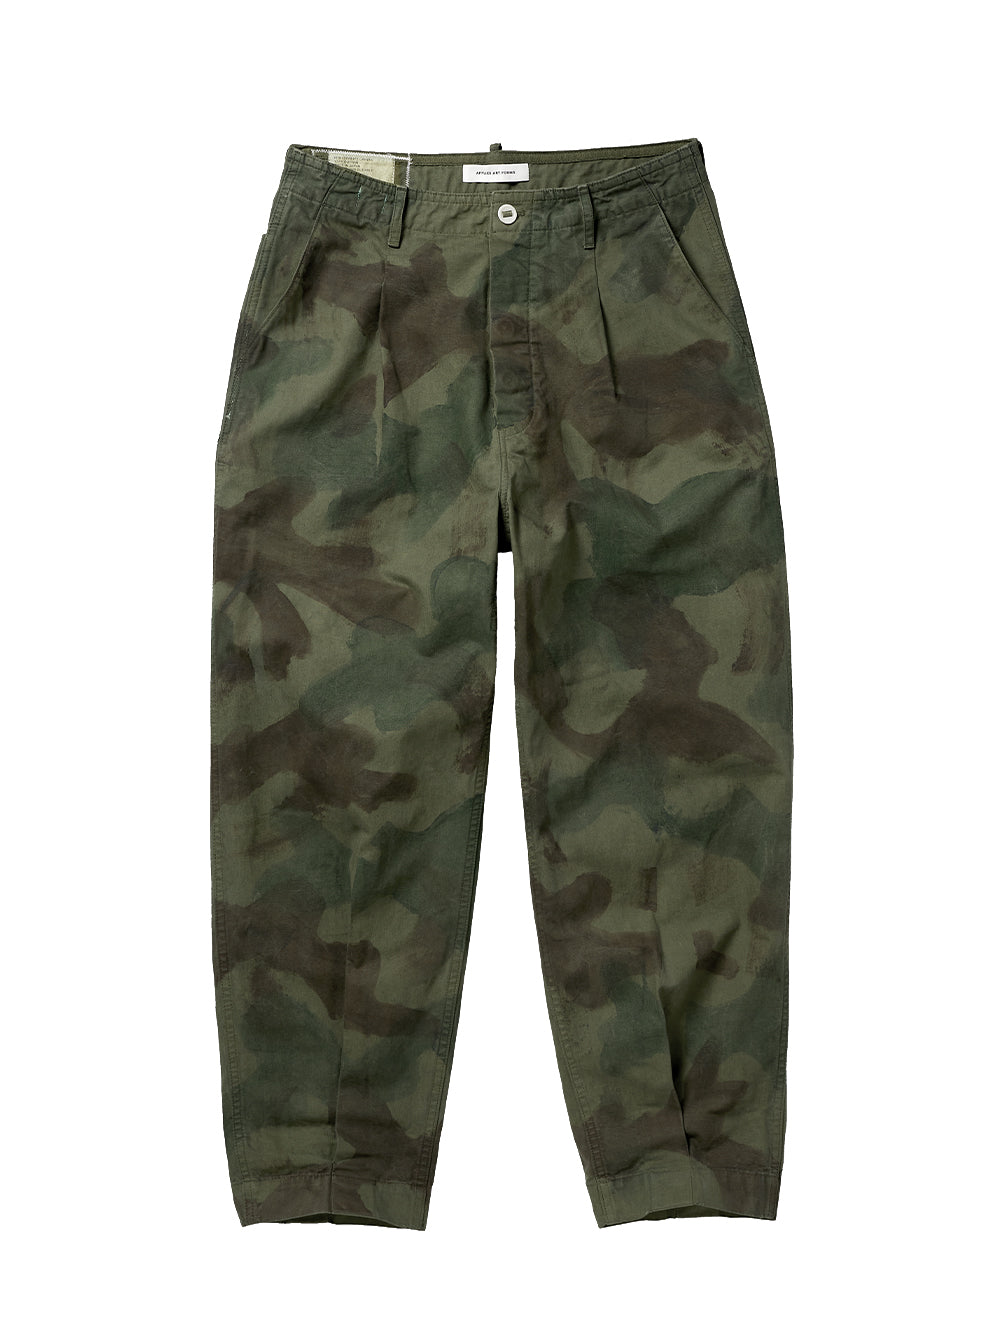 Hand Painted Camo Cargo (Green Camou)